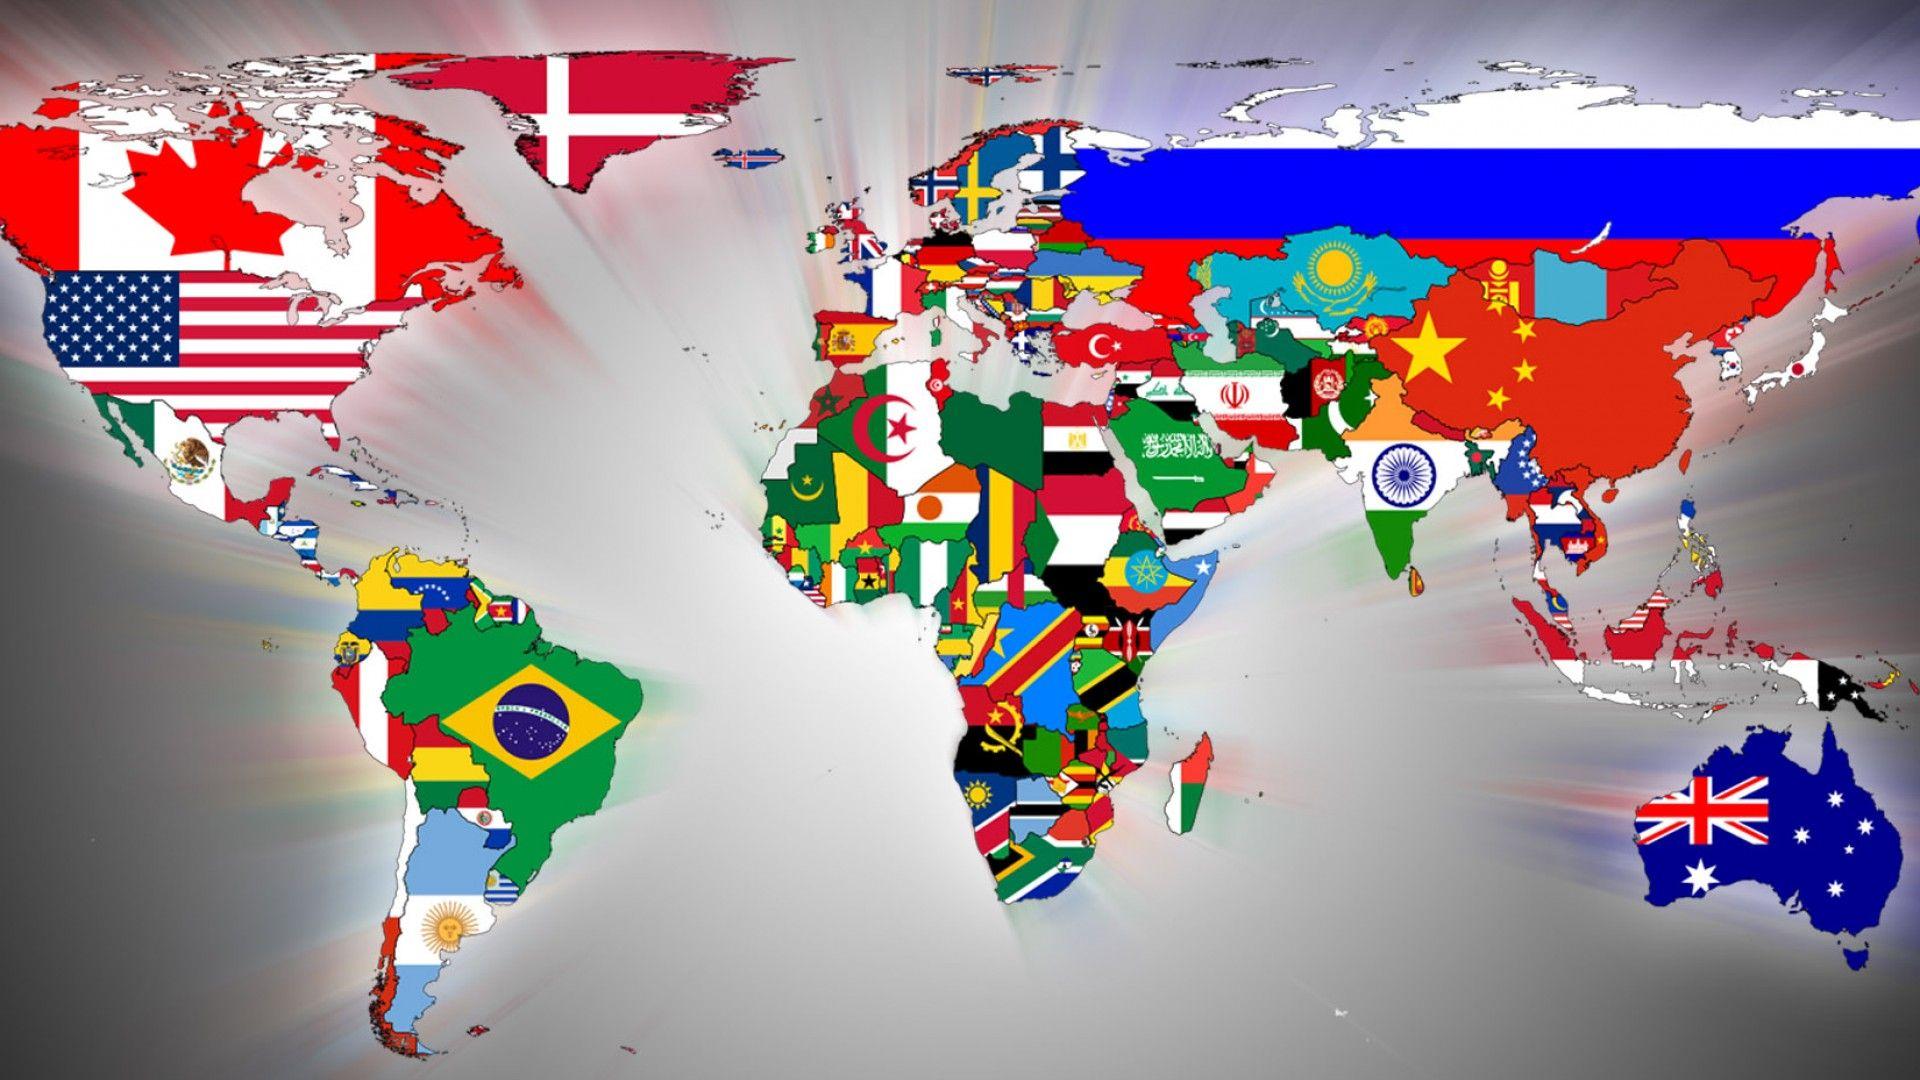 ScreenHeaven: Flags world map desktop and mobile background